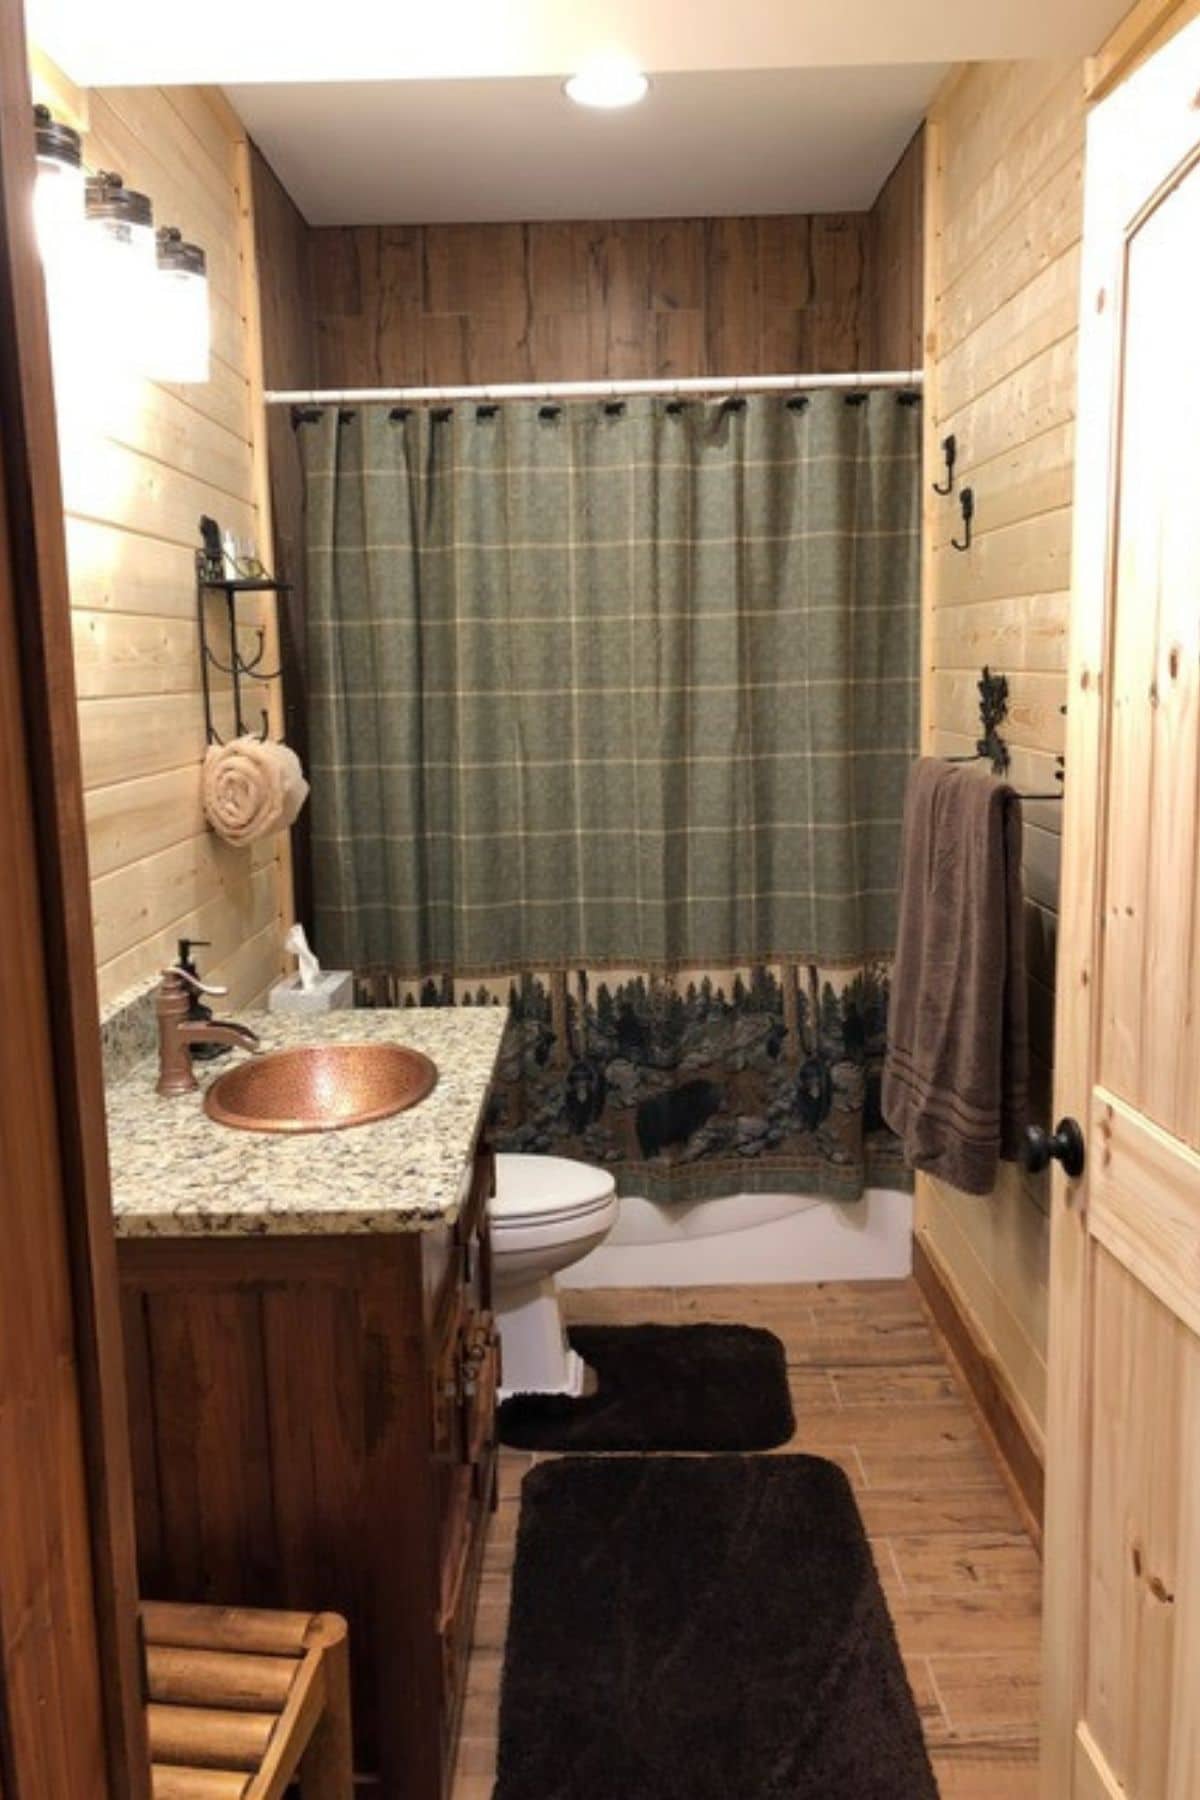 green shower curtain on shower in back of bathroom with wood cabinet under brass sink